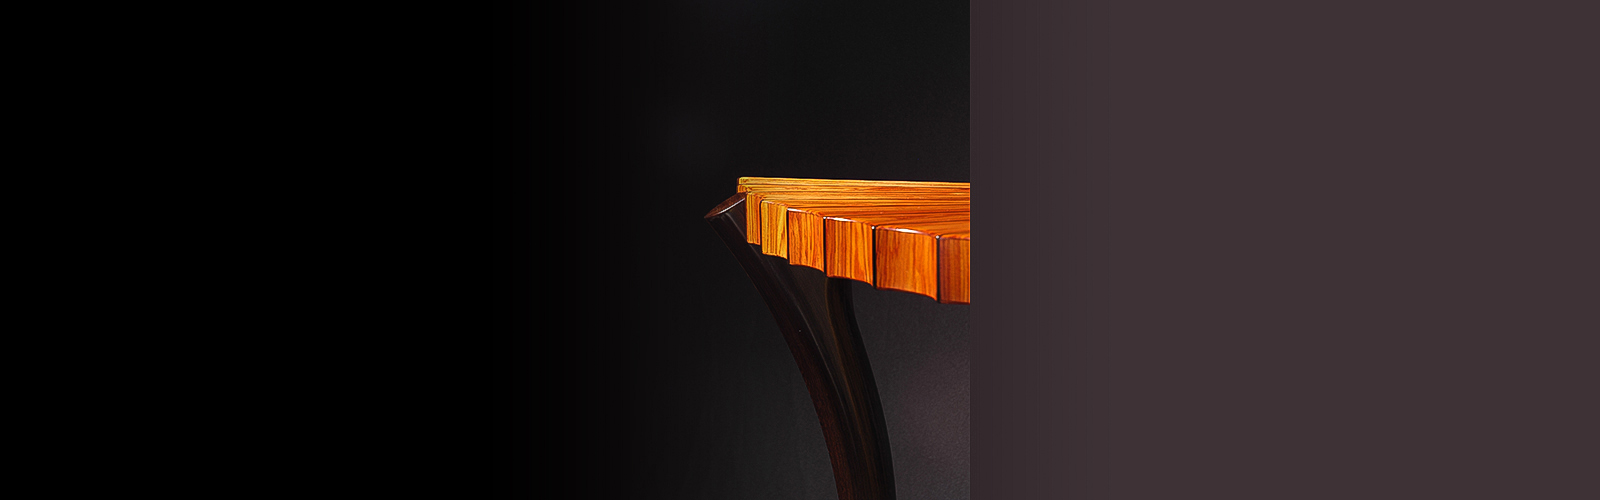 Console-Table-innerbanner